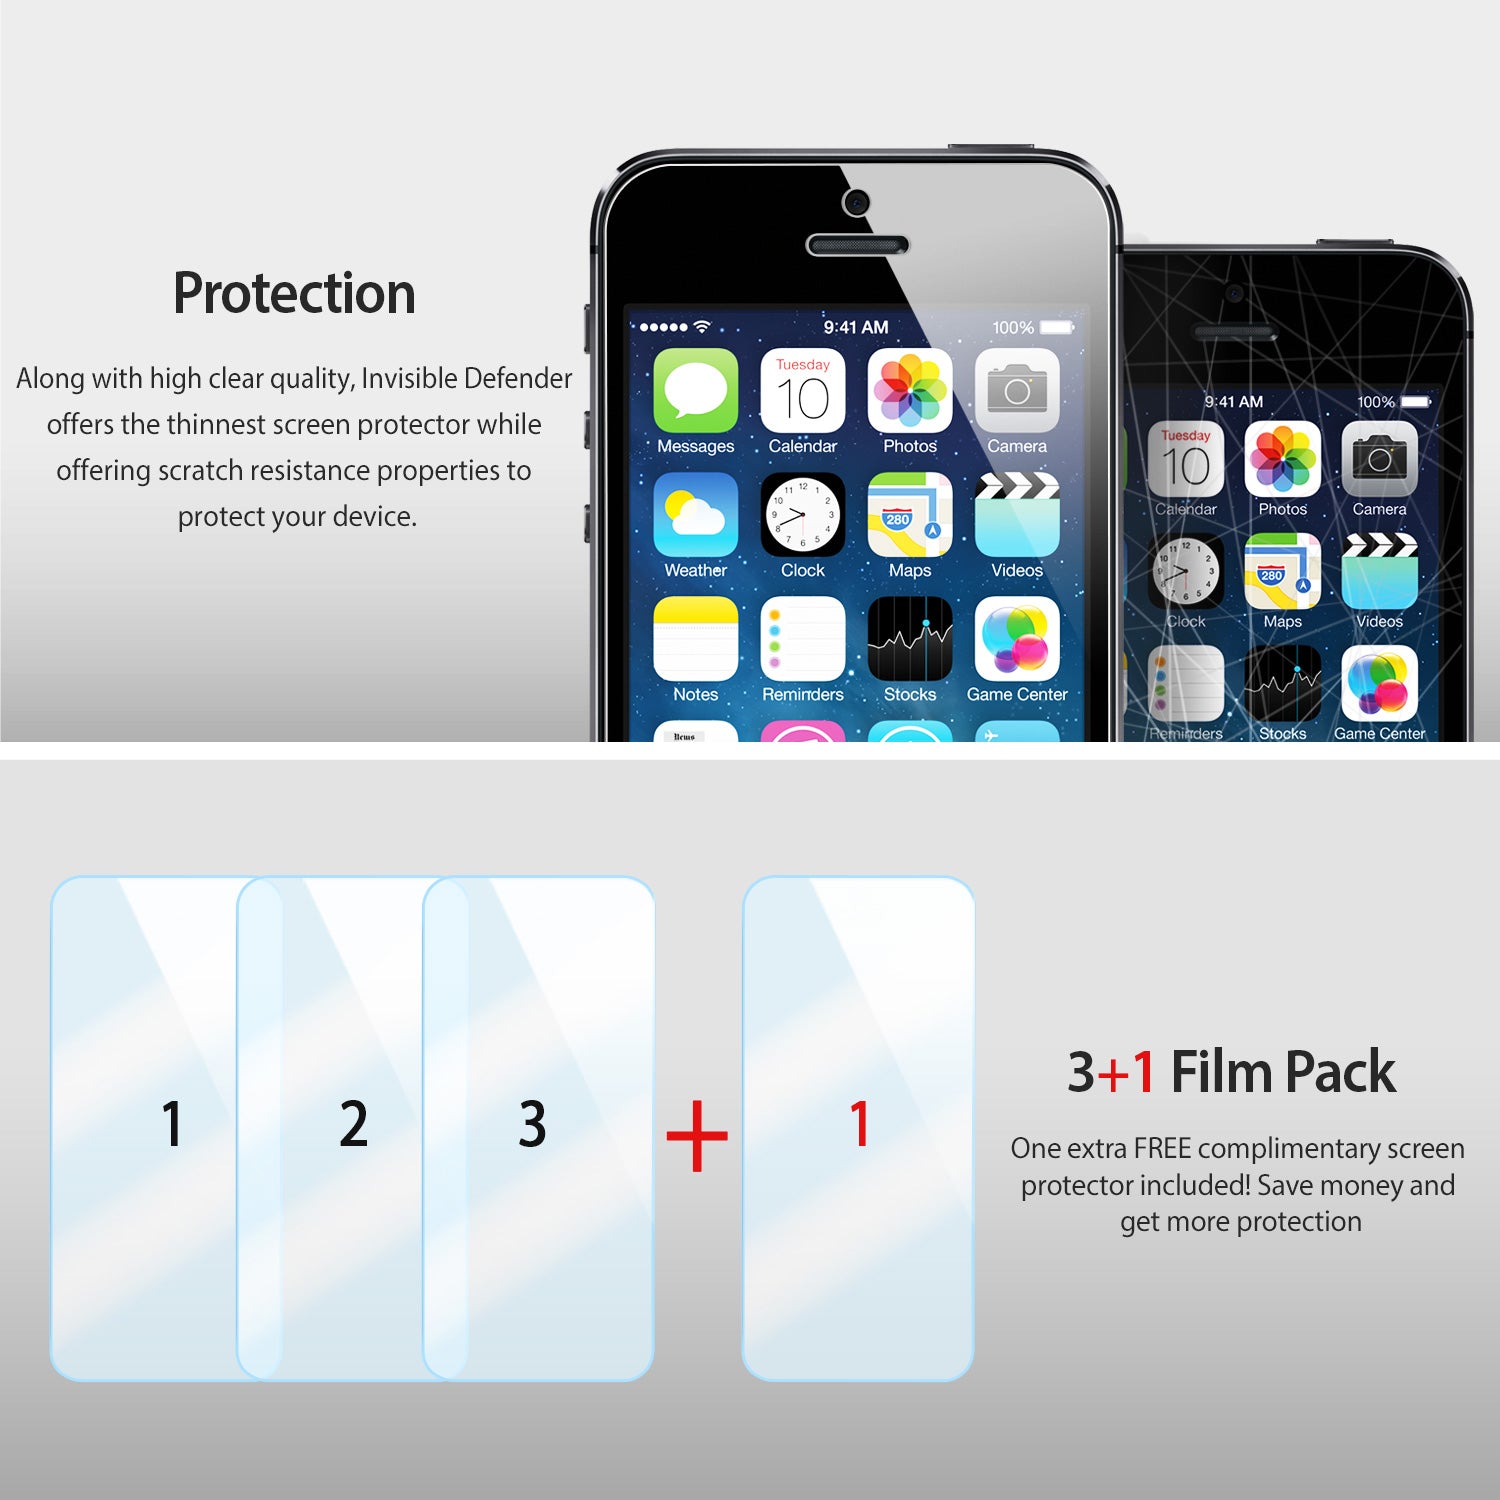 Google Nexus 5X Screen Protector | Invisible Defender [4P] - Protection. 3+1 Film Pack